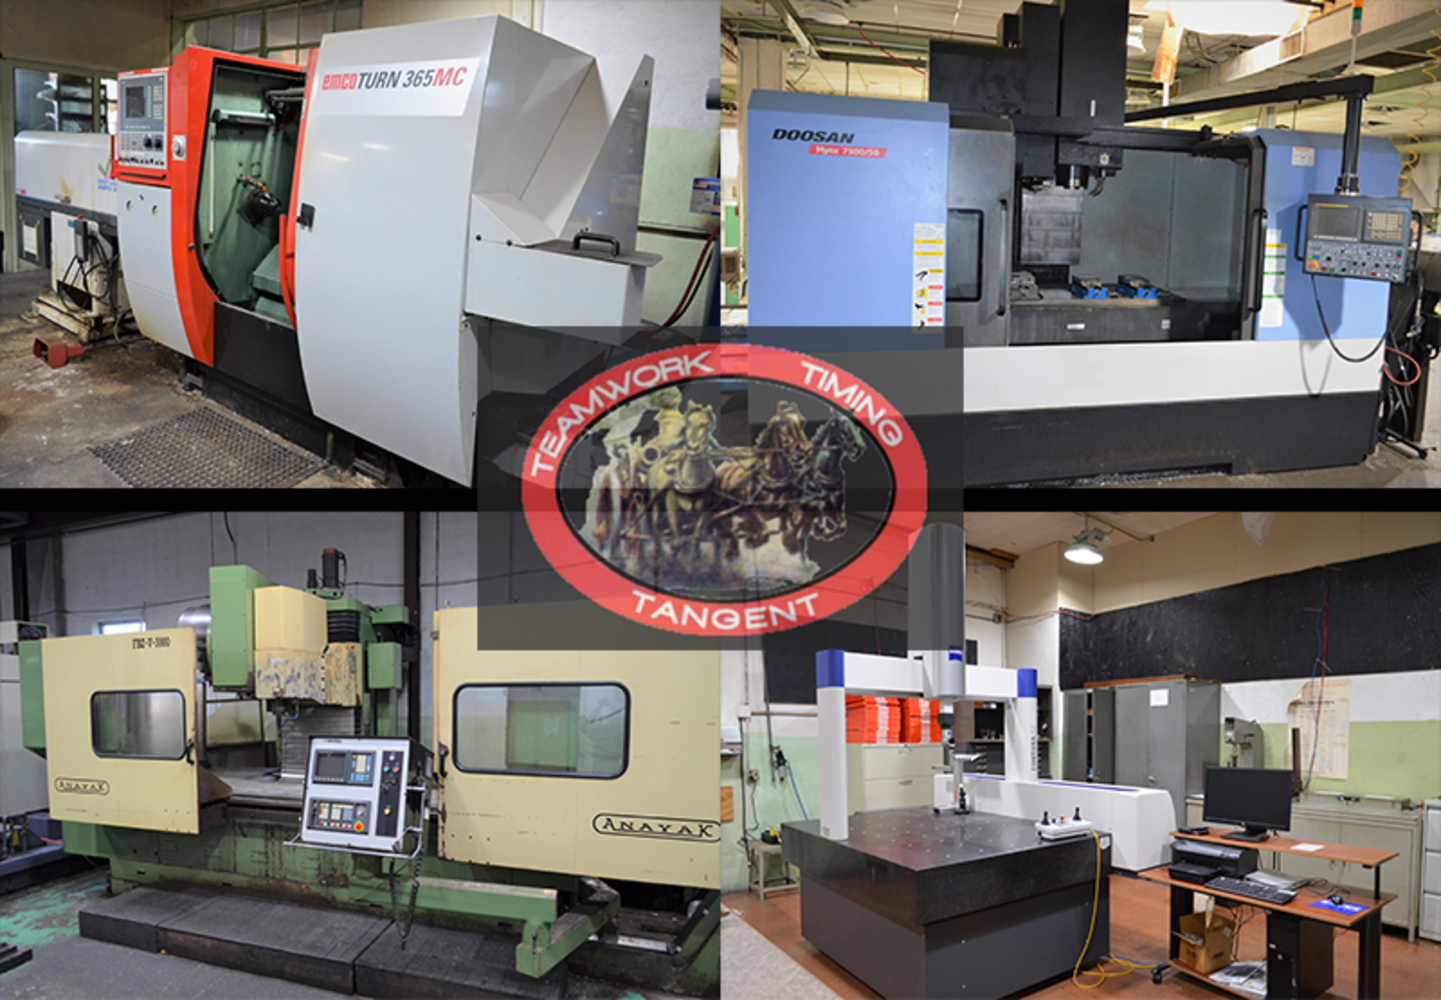 MACHINERY AND EQUIPMENT OF A PRECISION CNC MACHINE SHOP BY ORDER OF TANGENT MACHINE & TOOL CORPORATION